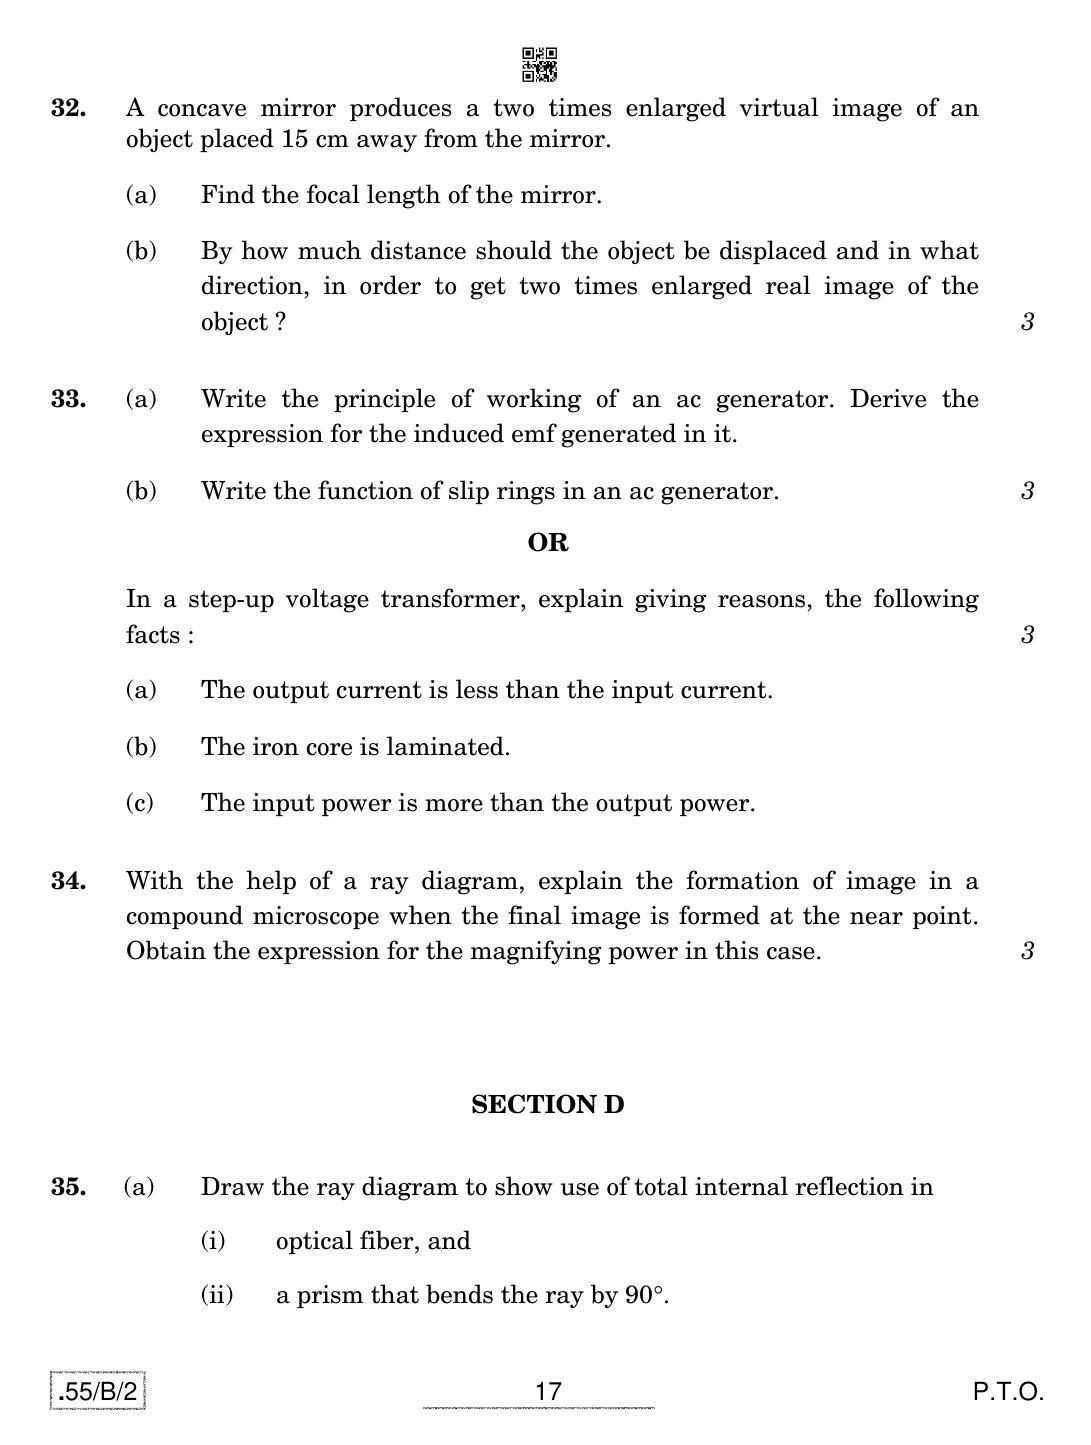 CBSE Class 12 55-C-2 - Physics 2020 Compartment Question Paper - Page 17